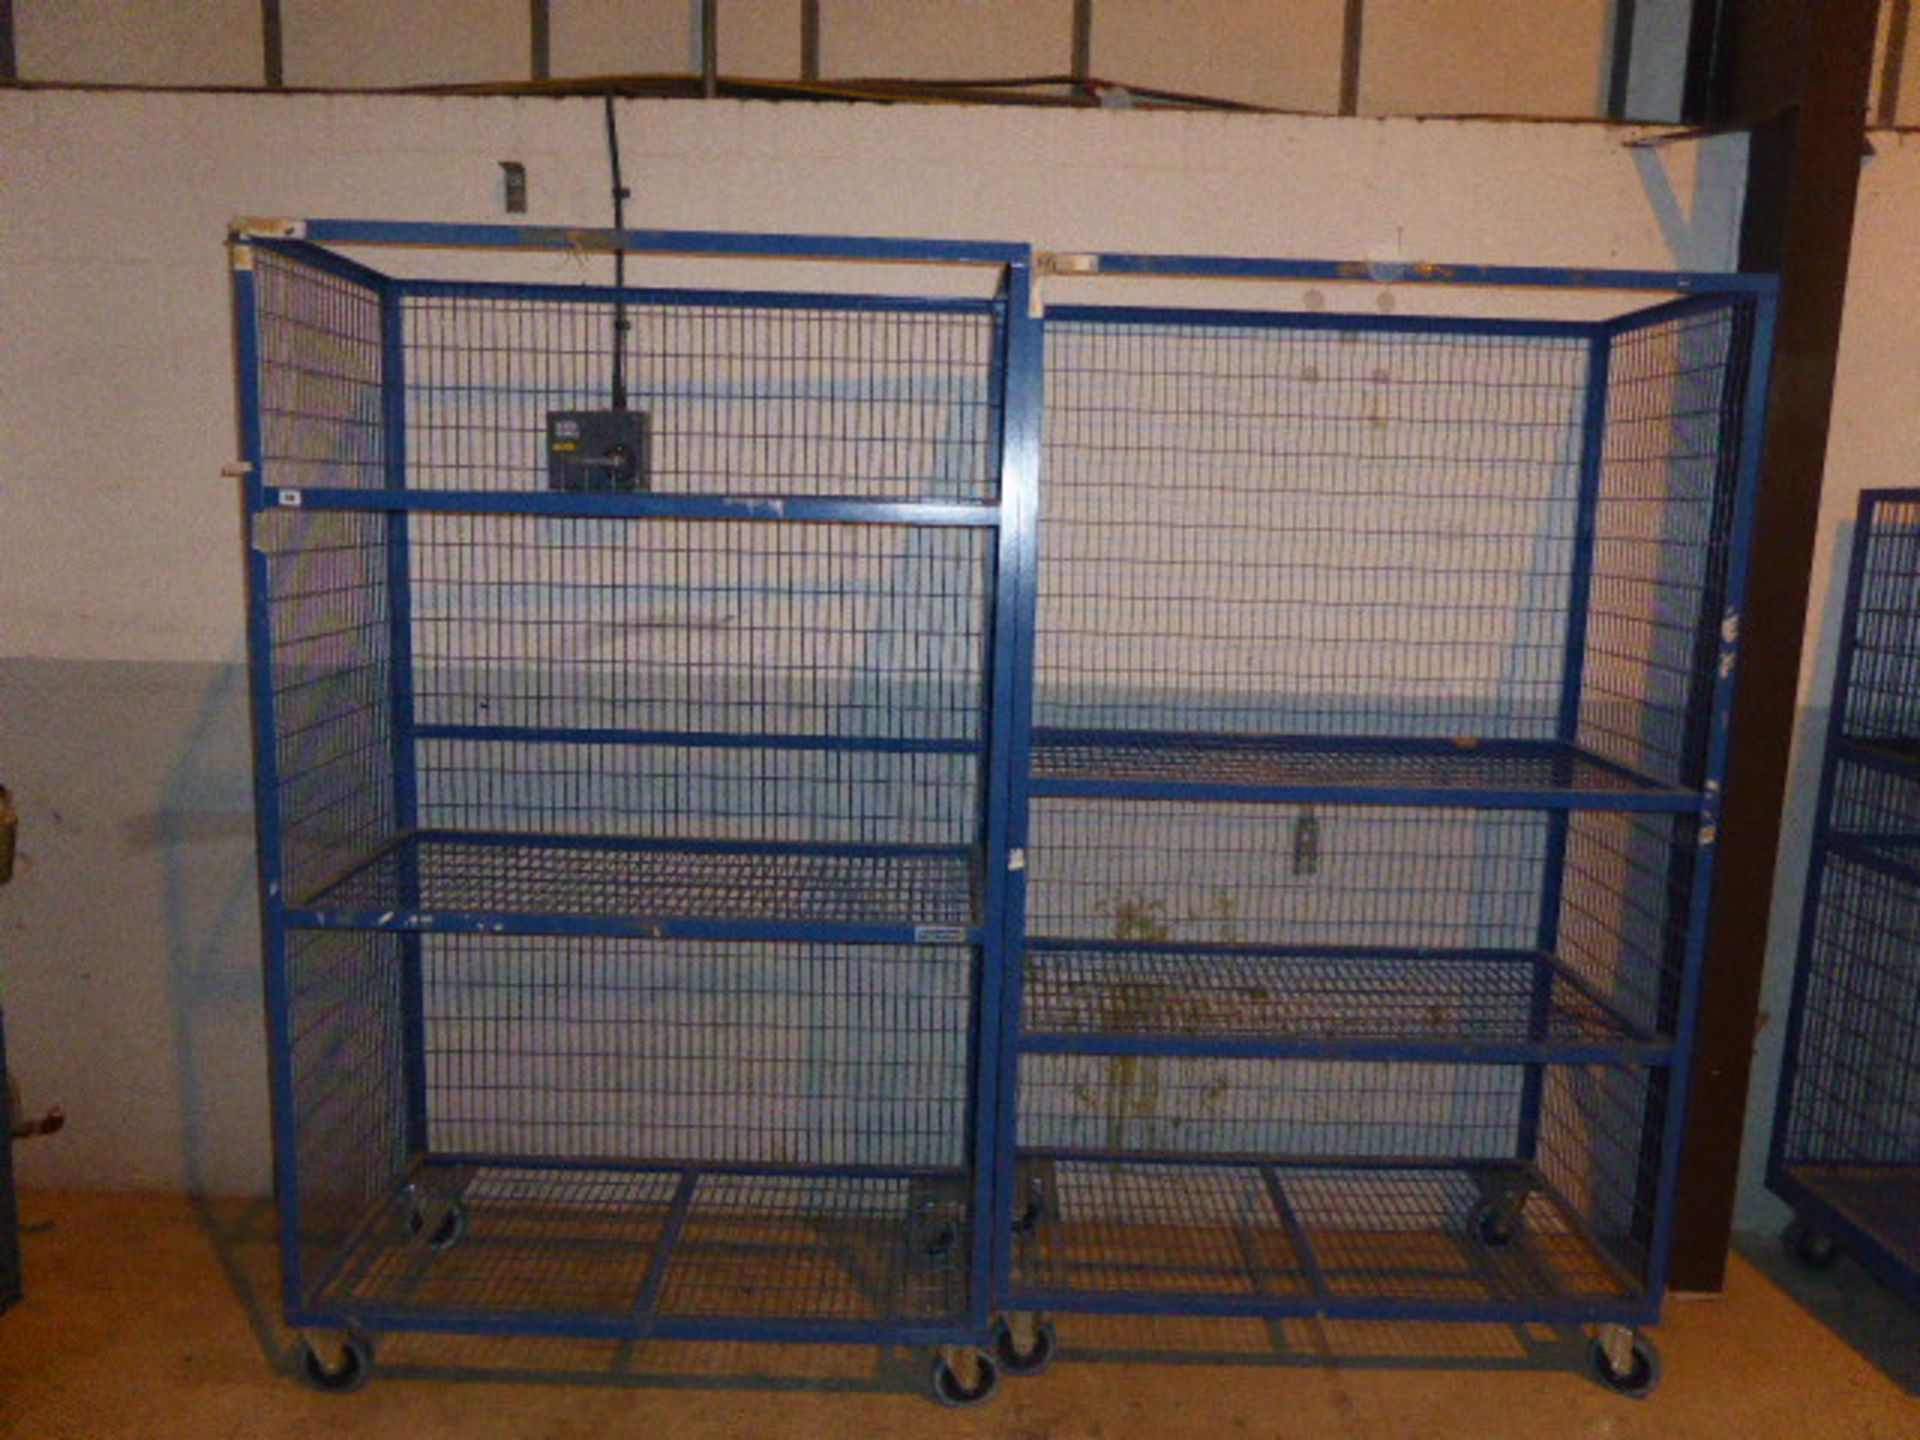 2 Welconstruct blue mesh mobile storage racks approx 2m high - Image 2 of 2